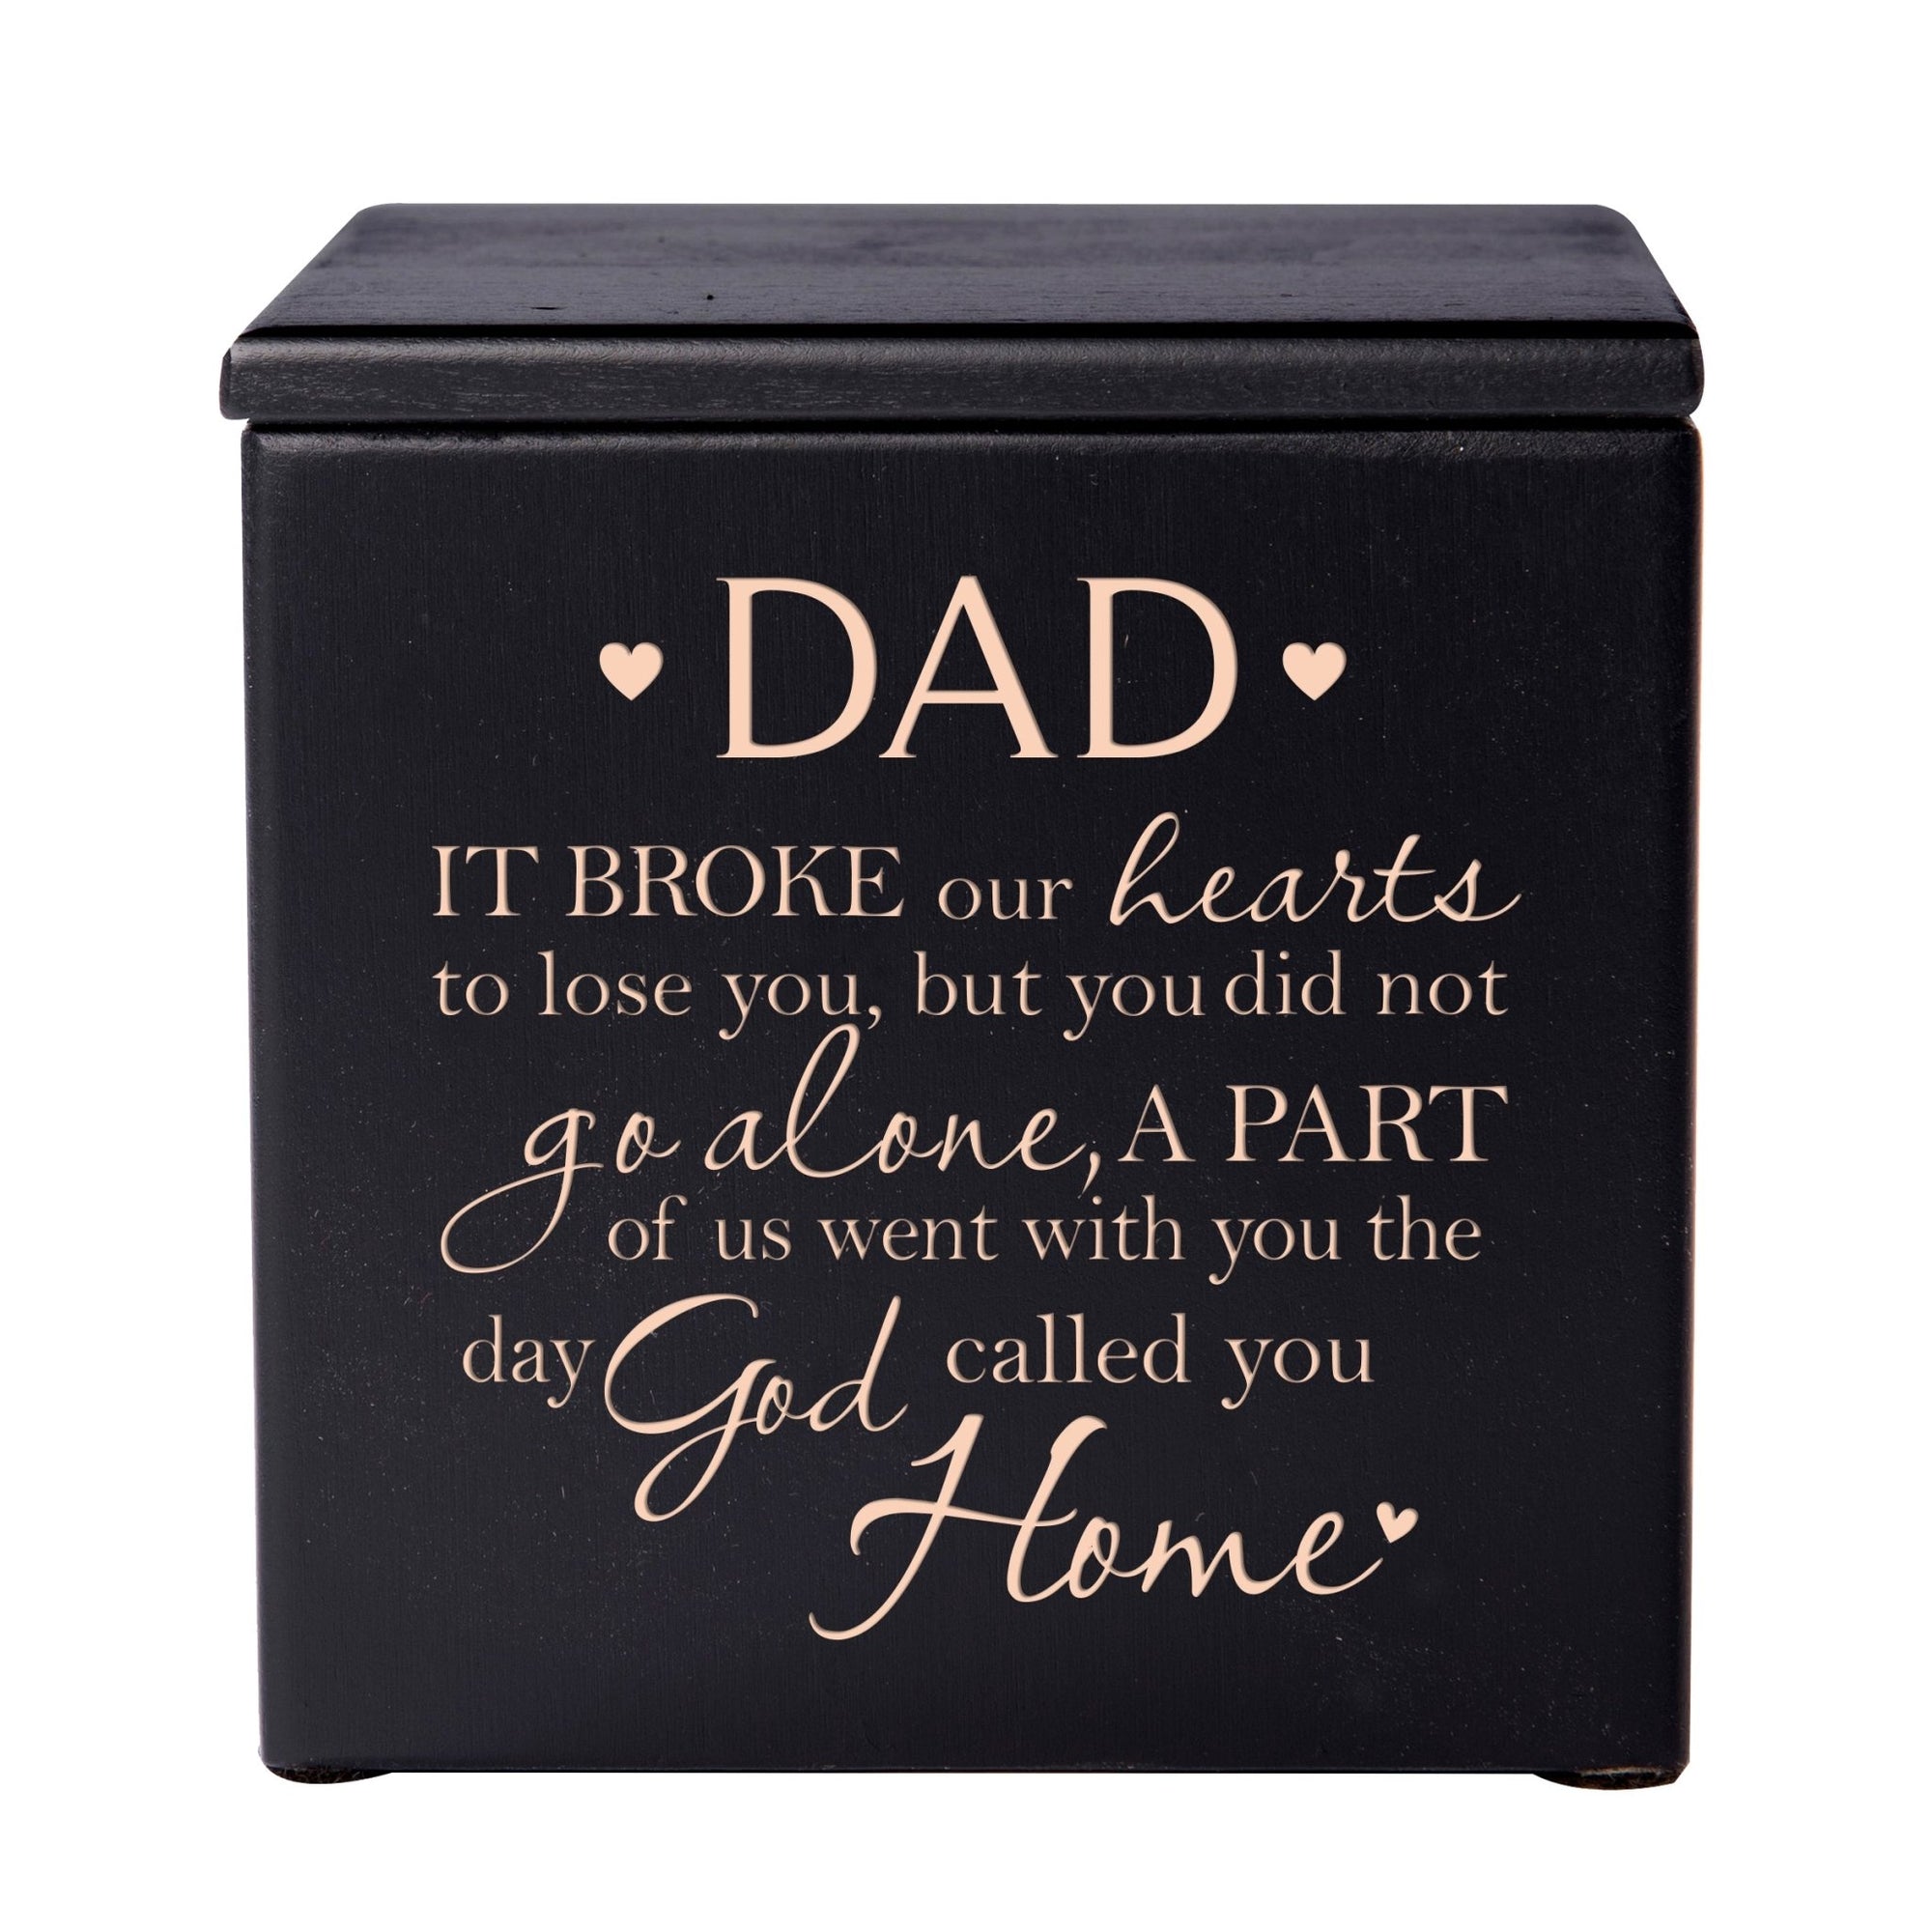 Modern Inspirational Wooden Cremation Urn Box 4.5x4.5in Holds 49 Cu Inches Of Human Ashes (It Broke Our Hearts Dad) Funeral and Commemorative Keepsake - LifeSong Milestones